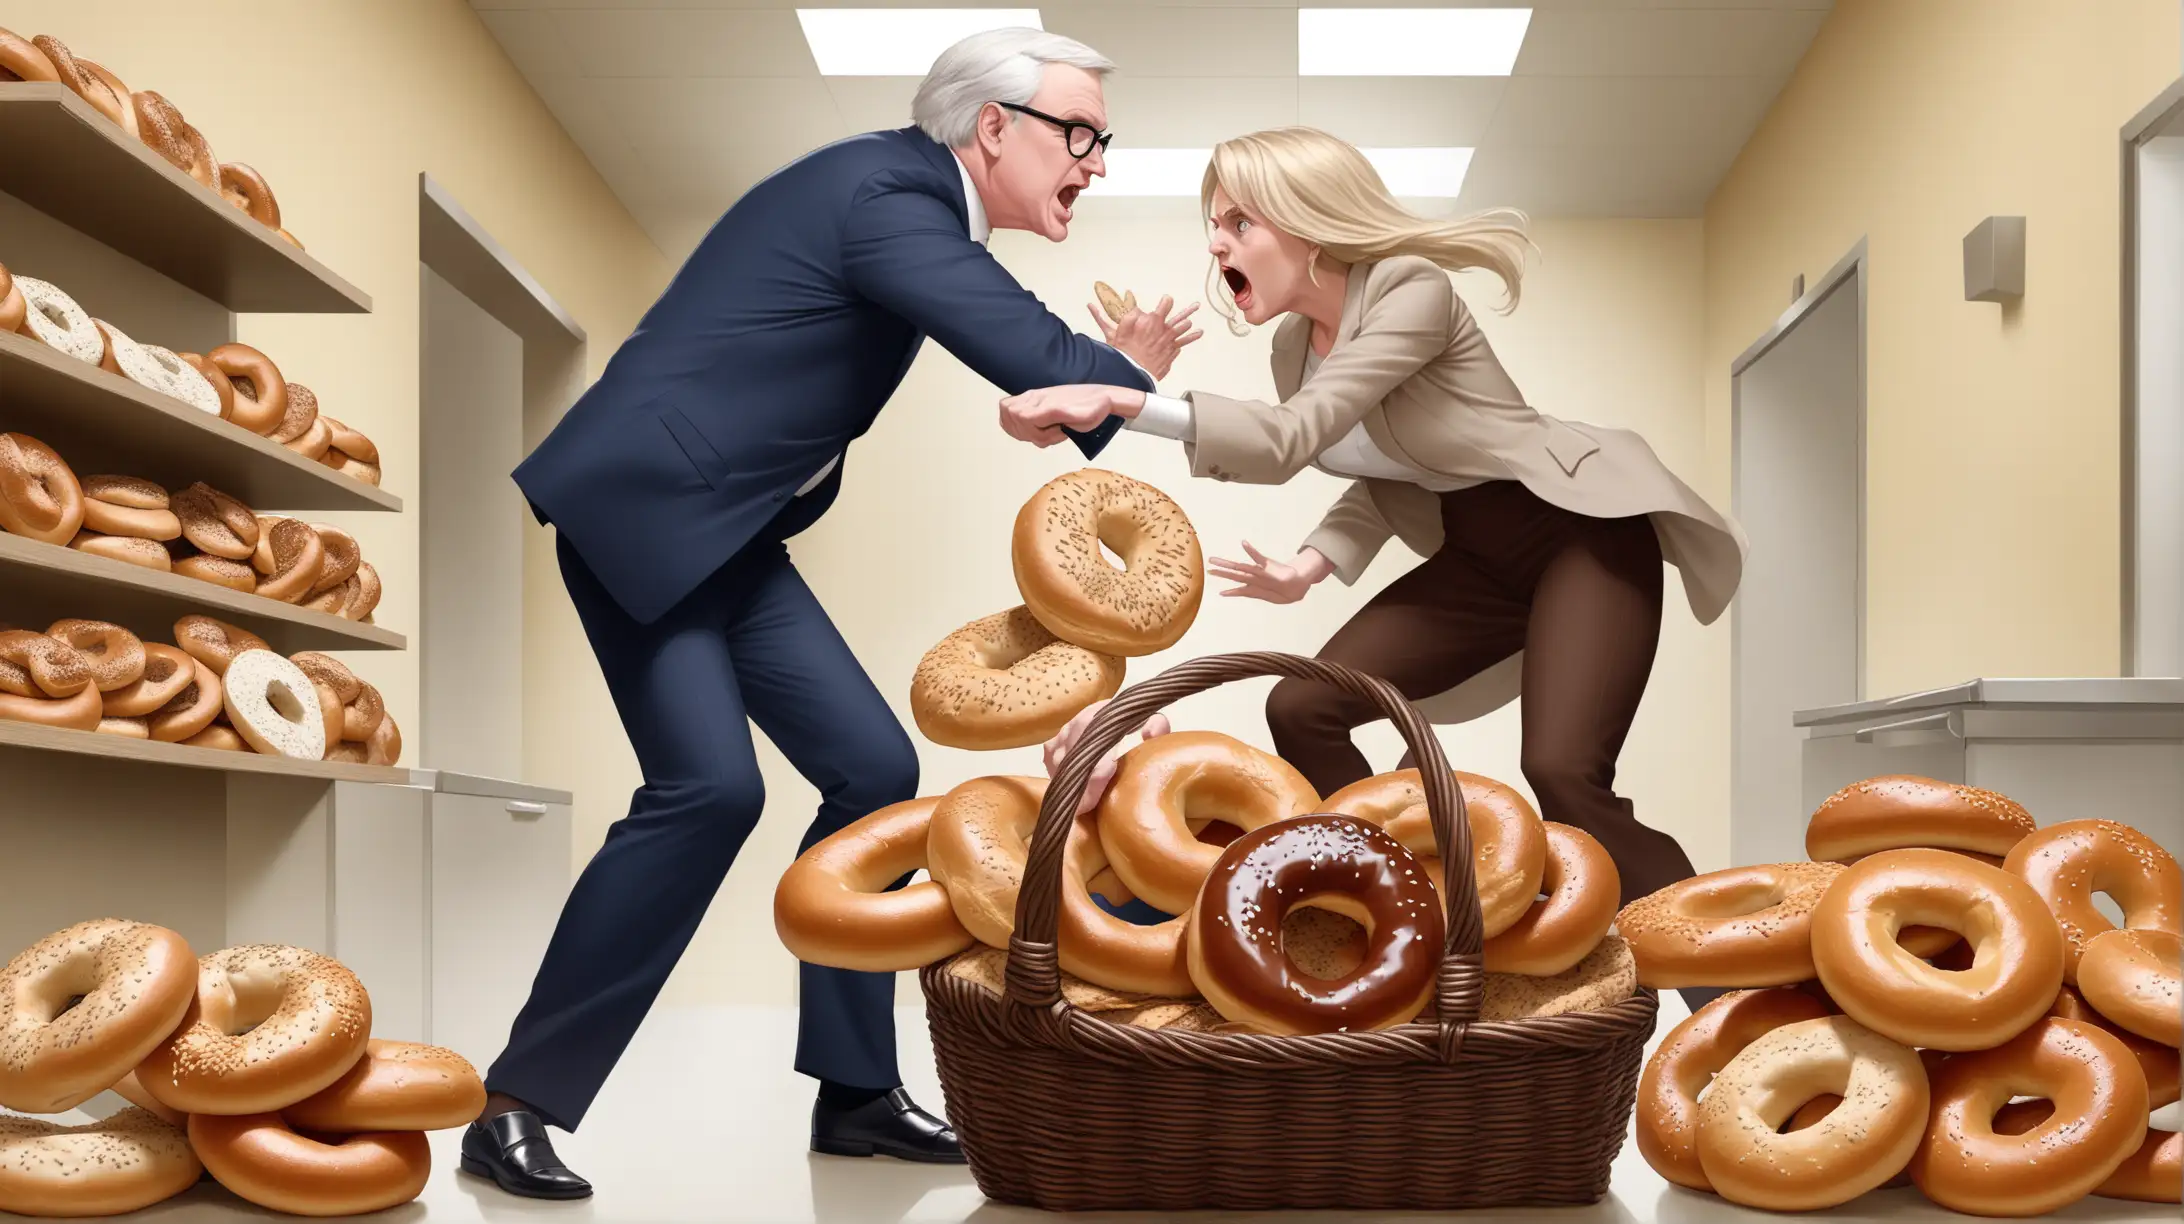 a rich white man and a trashy white woman fight over a basket of bagels and matza